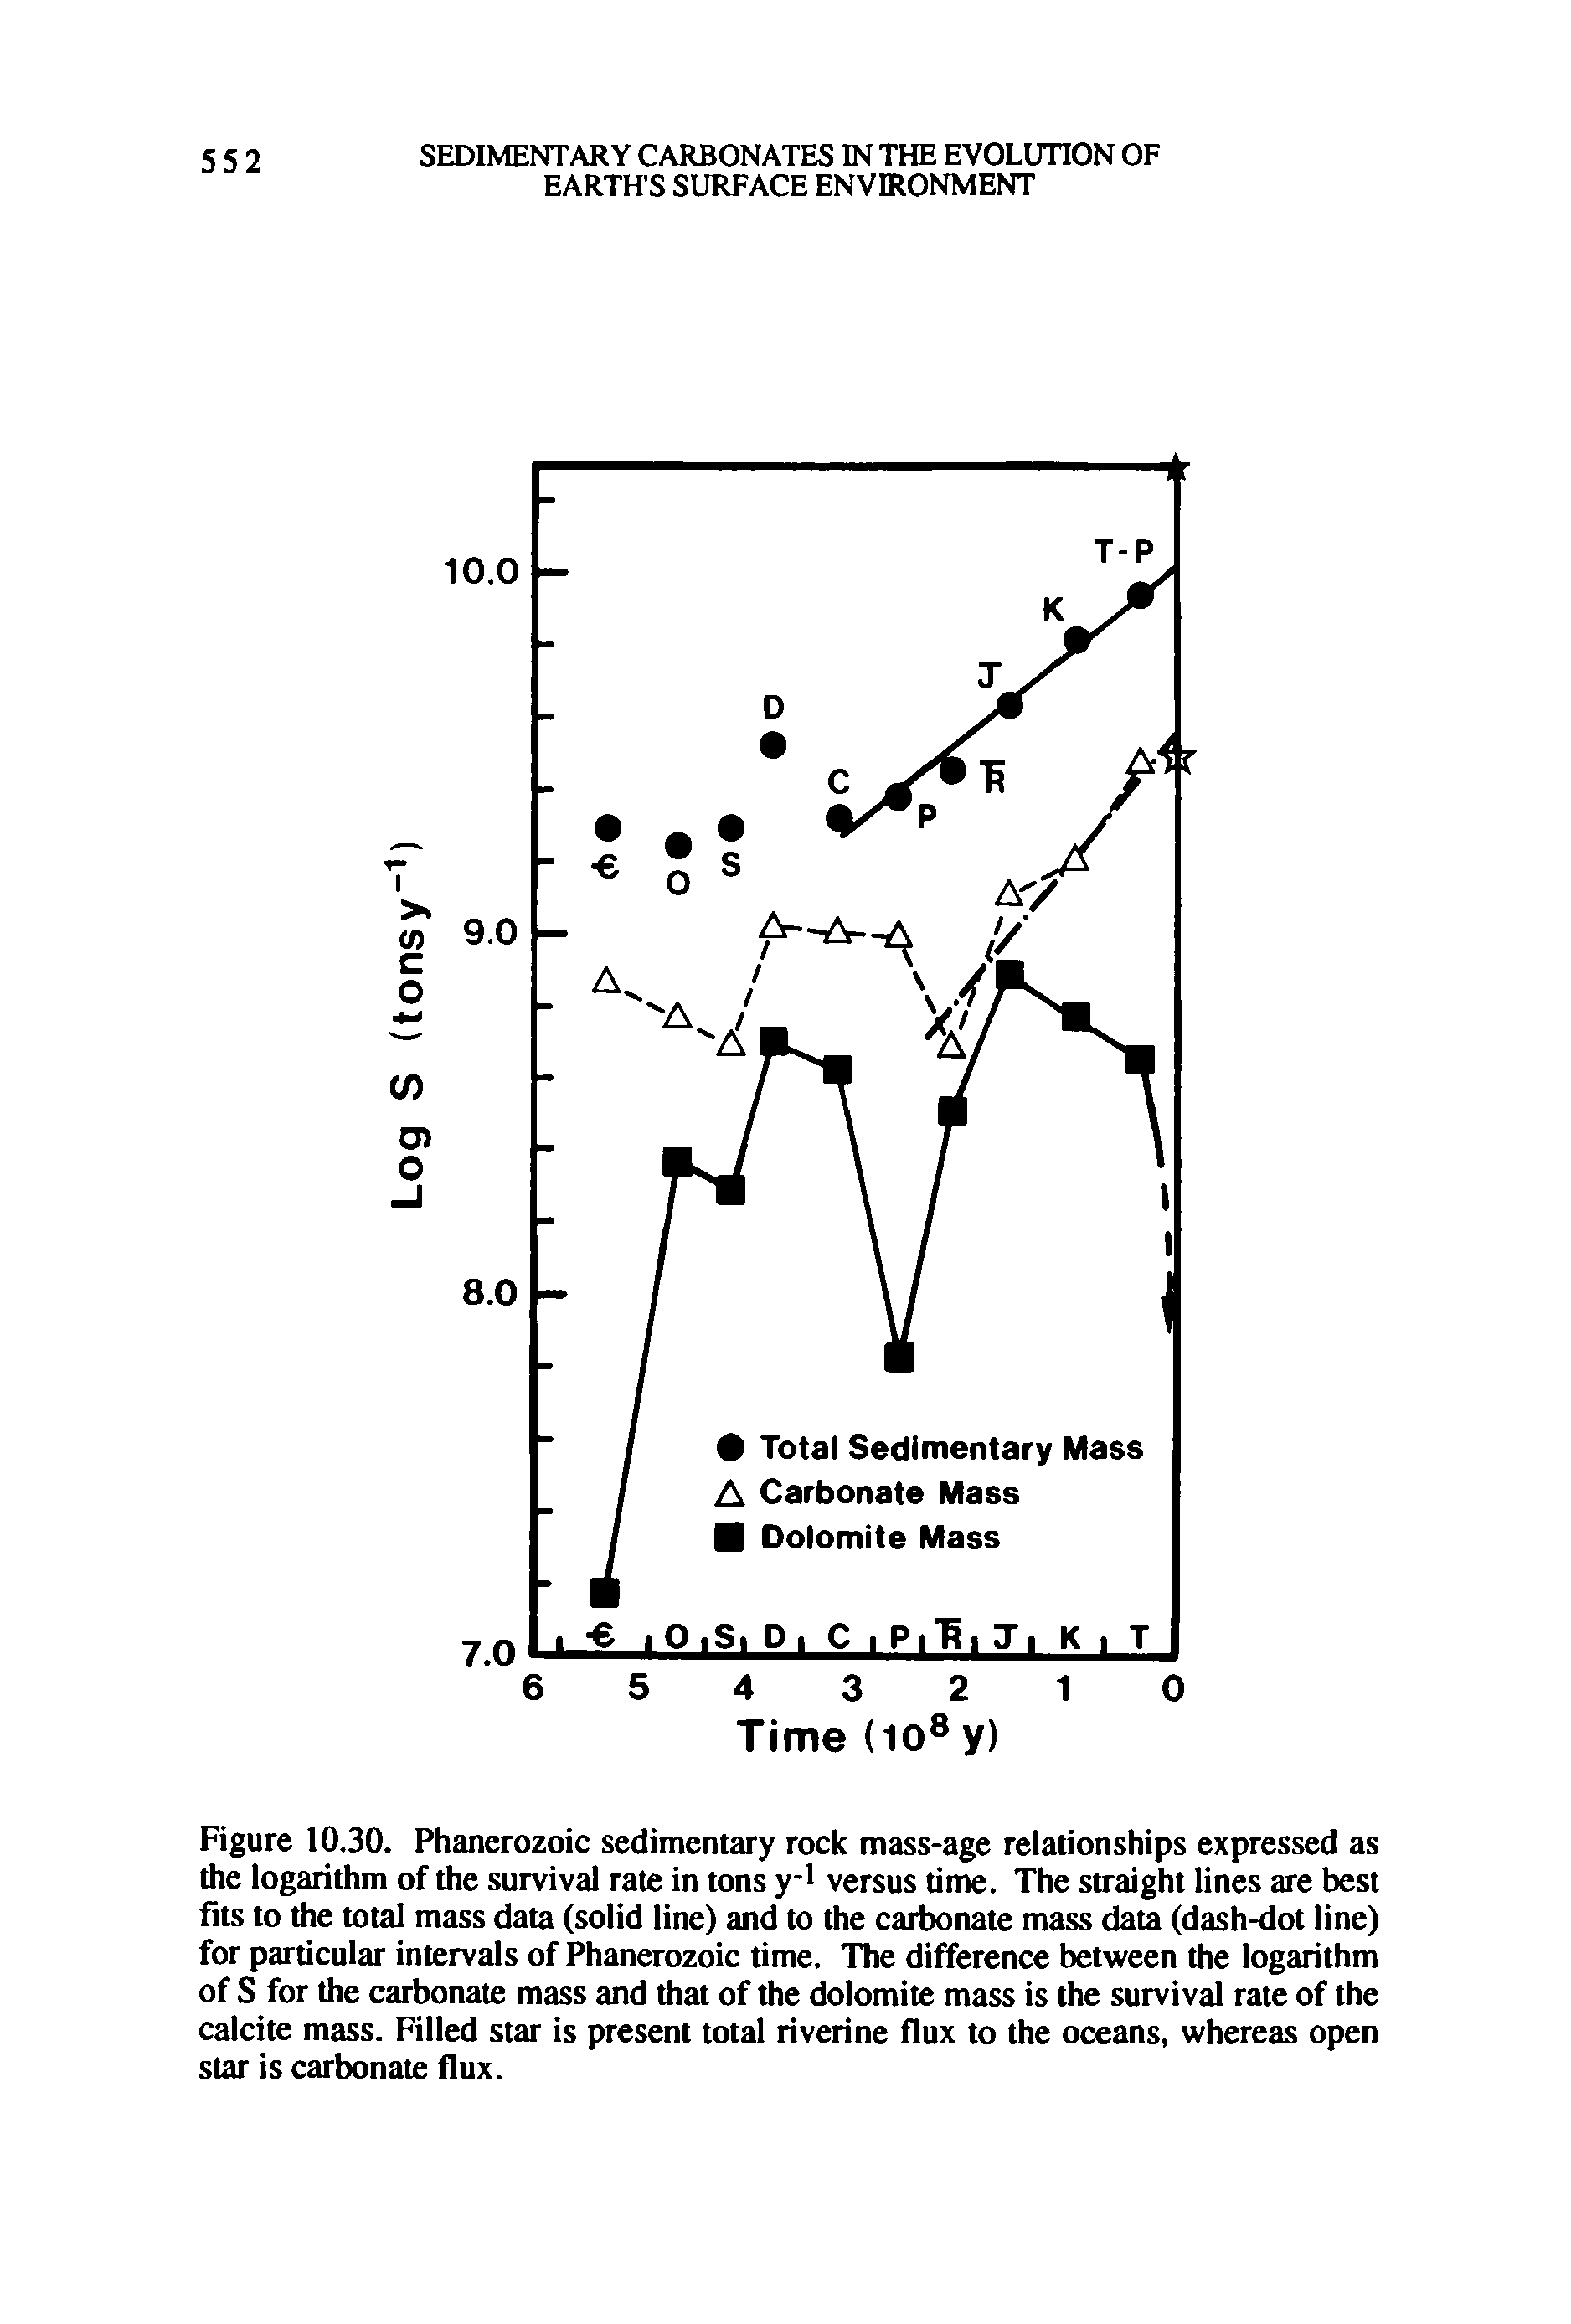 Figure 10.30. Phanerozoic sedimentary rock mass-age relationships expressed as the logarithm of the survival rate in tons y-1 versus time. The straight lines are best fits to the total mass data (solid line) and to the carbonate mass data (dash-dot line) for particular intervals of Phanerozoic time. The difference between the logarithm of S for the carbonate mass and that of the dolomite mass is the survival rate of the calcite mass. Filled star is present total riverine flux to the oceans, whereas open star is carbonate flux.